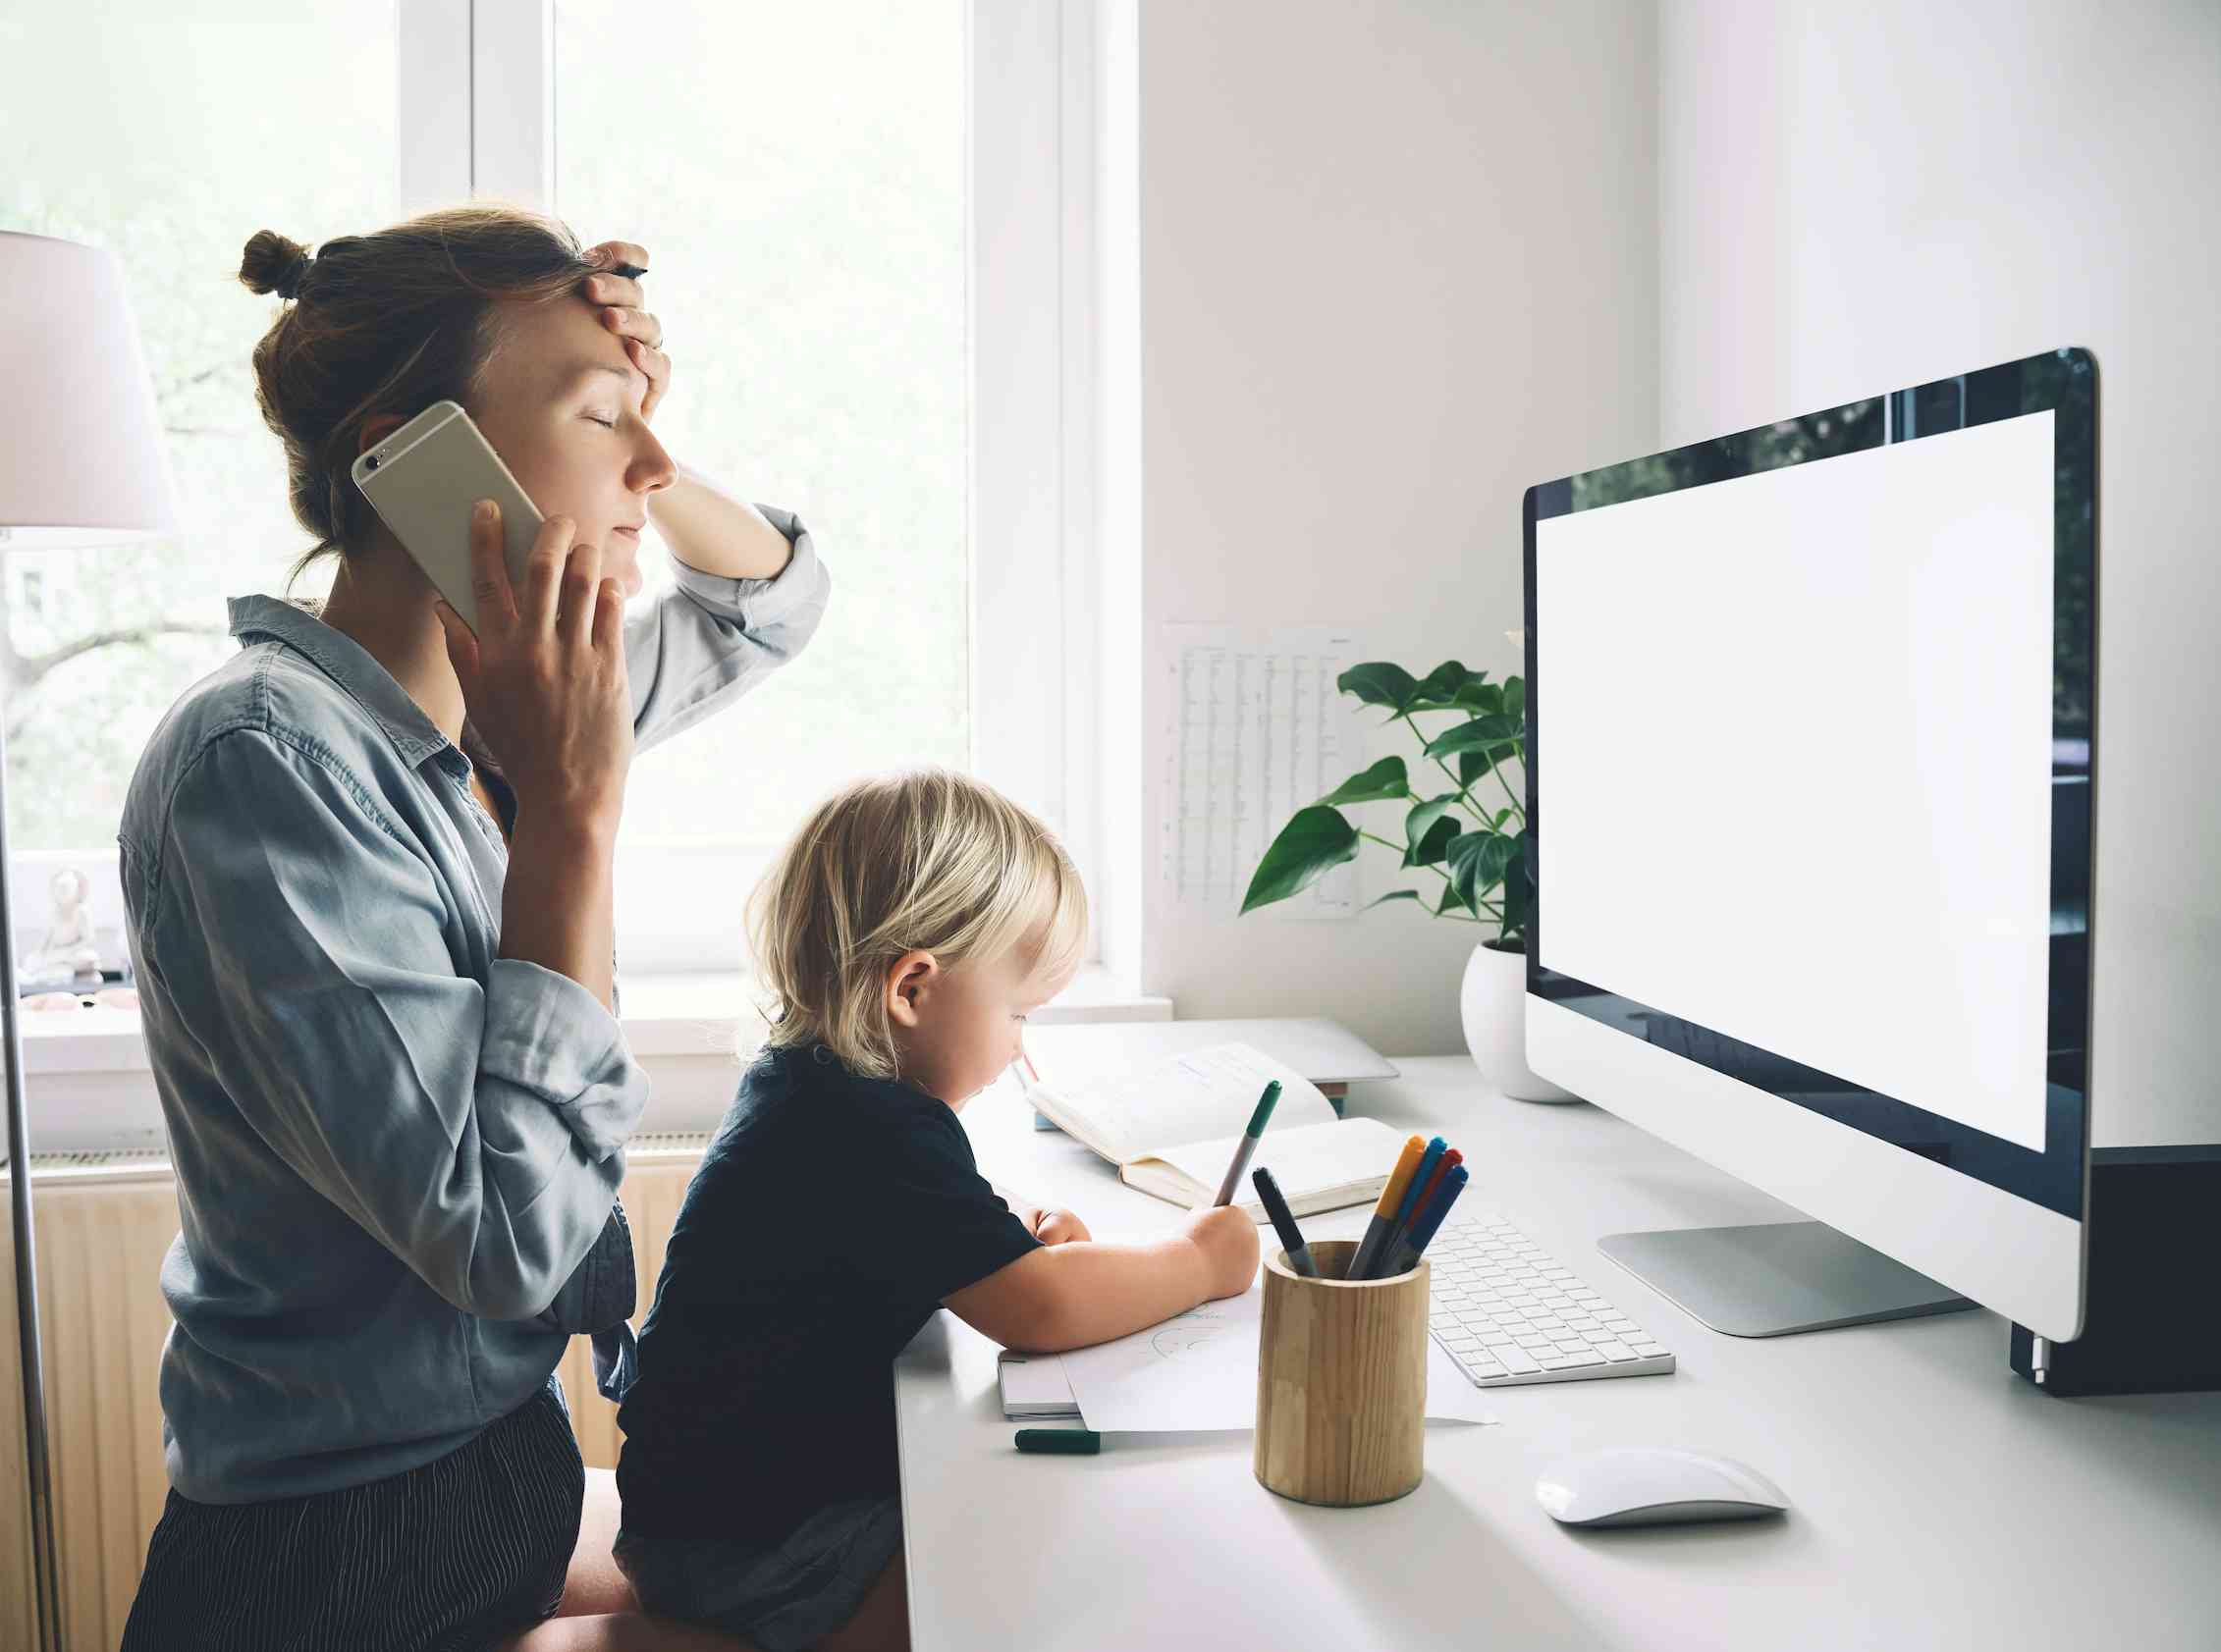 A stressed mum talks on the phone while looking at her computer, with a toddler sitting on her lap drawing